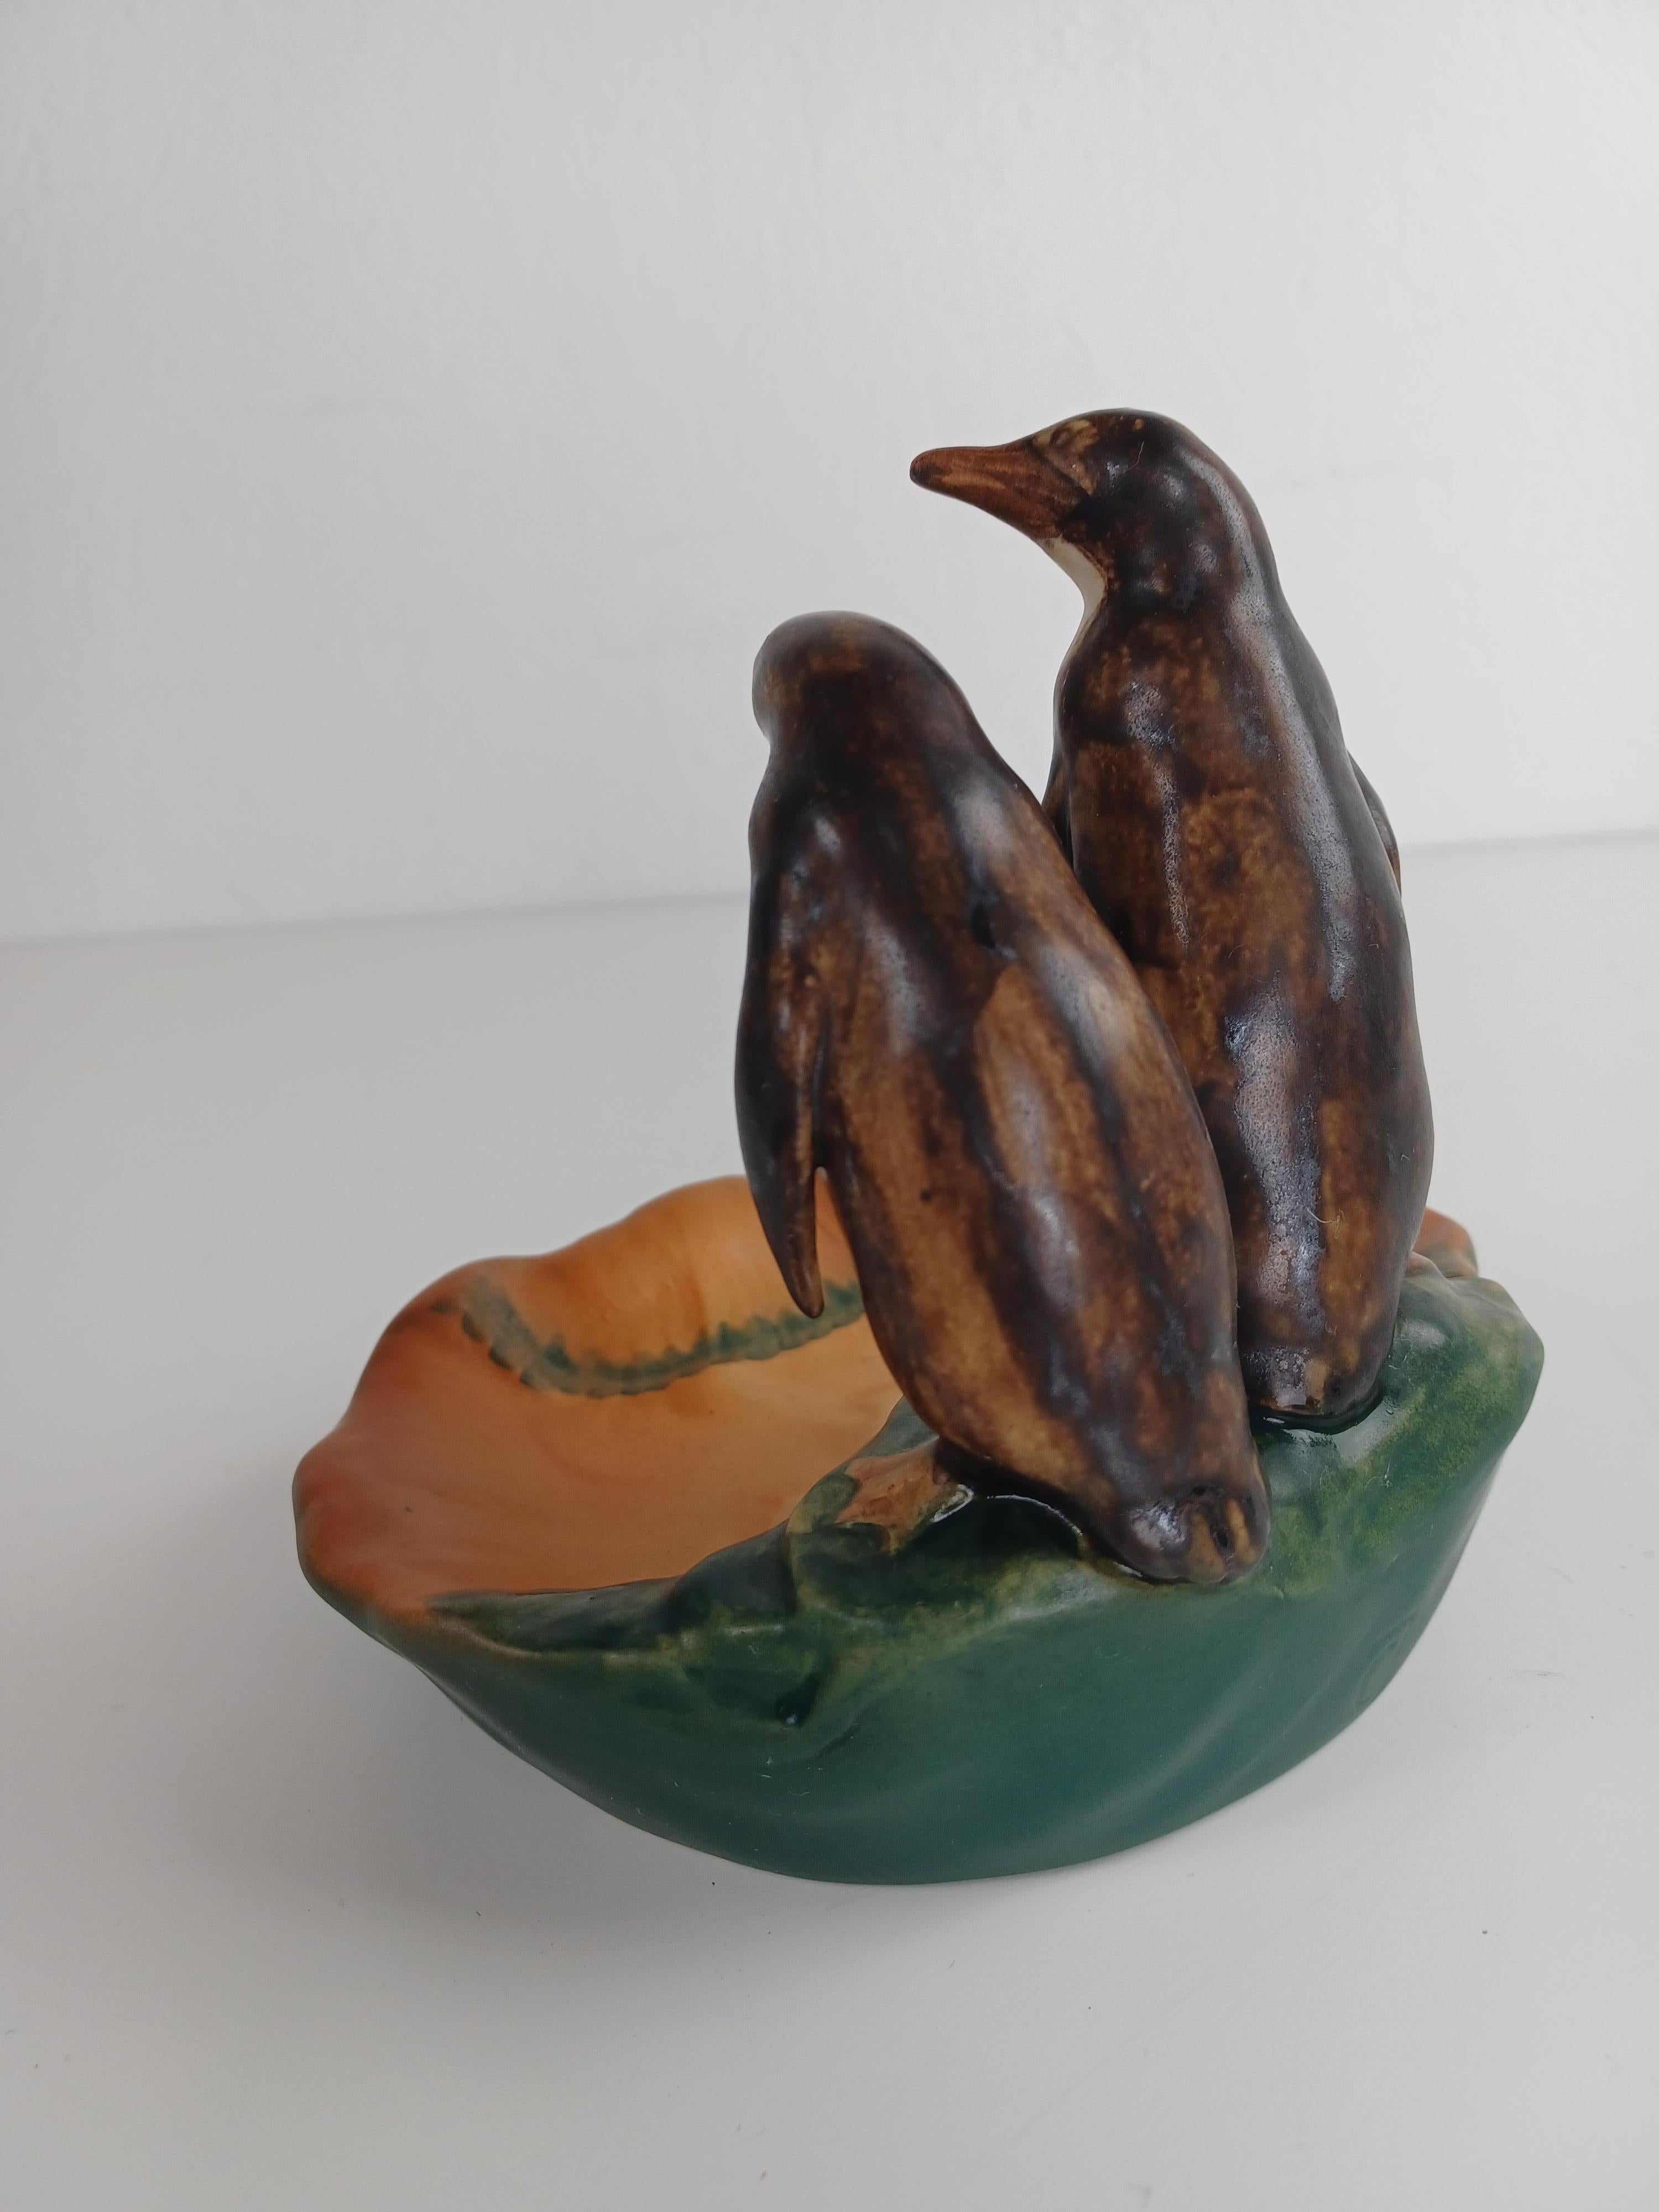 1920's Danish Hand-Crafted Art Nouveau Penguin Ash Tray / Bowl by P. Ipsens Enke In Good Condition For Sale In Knebel, DK